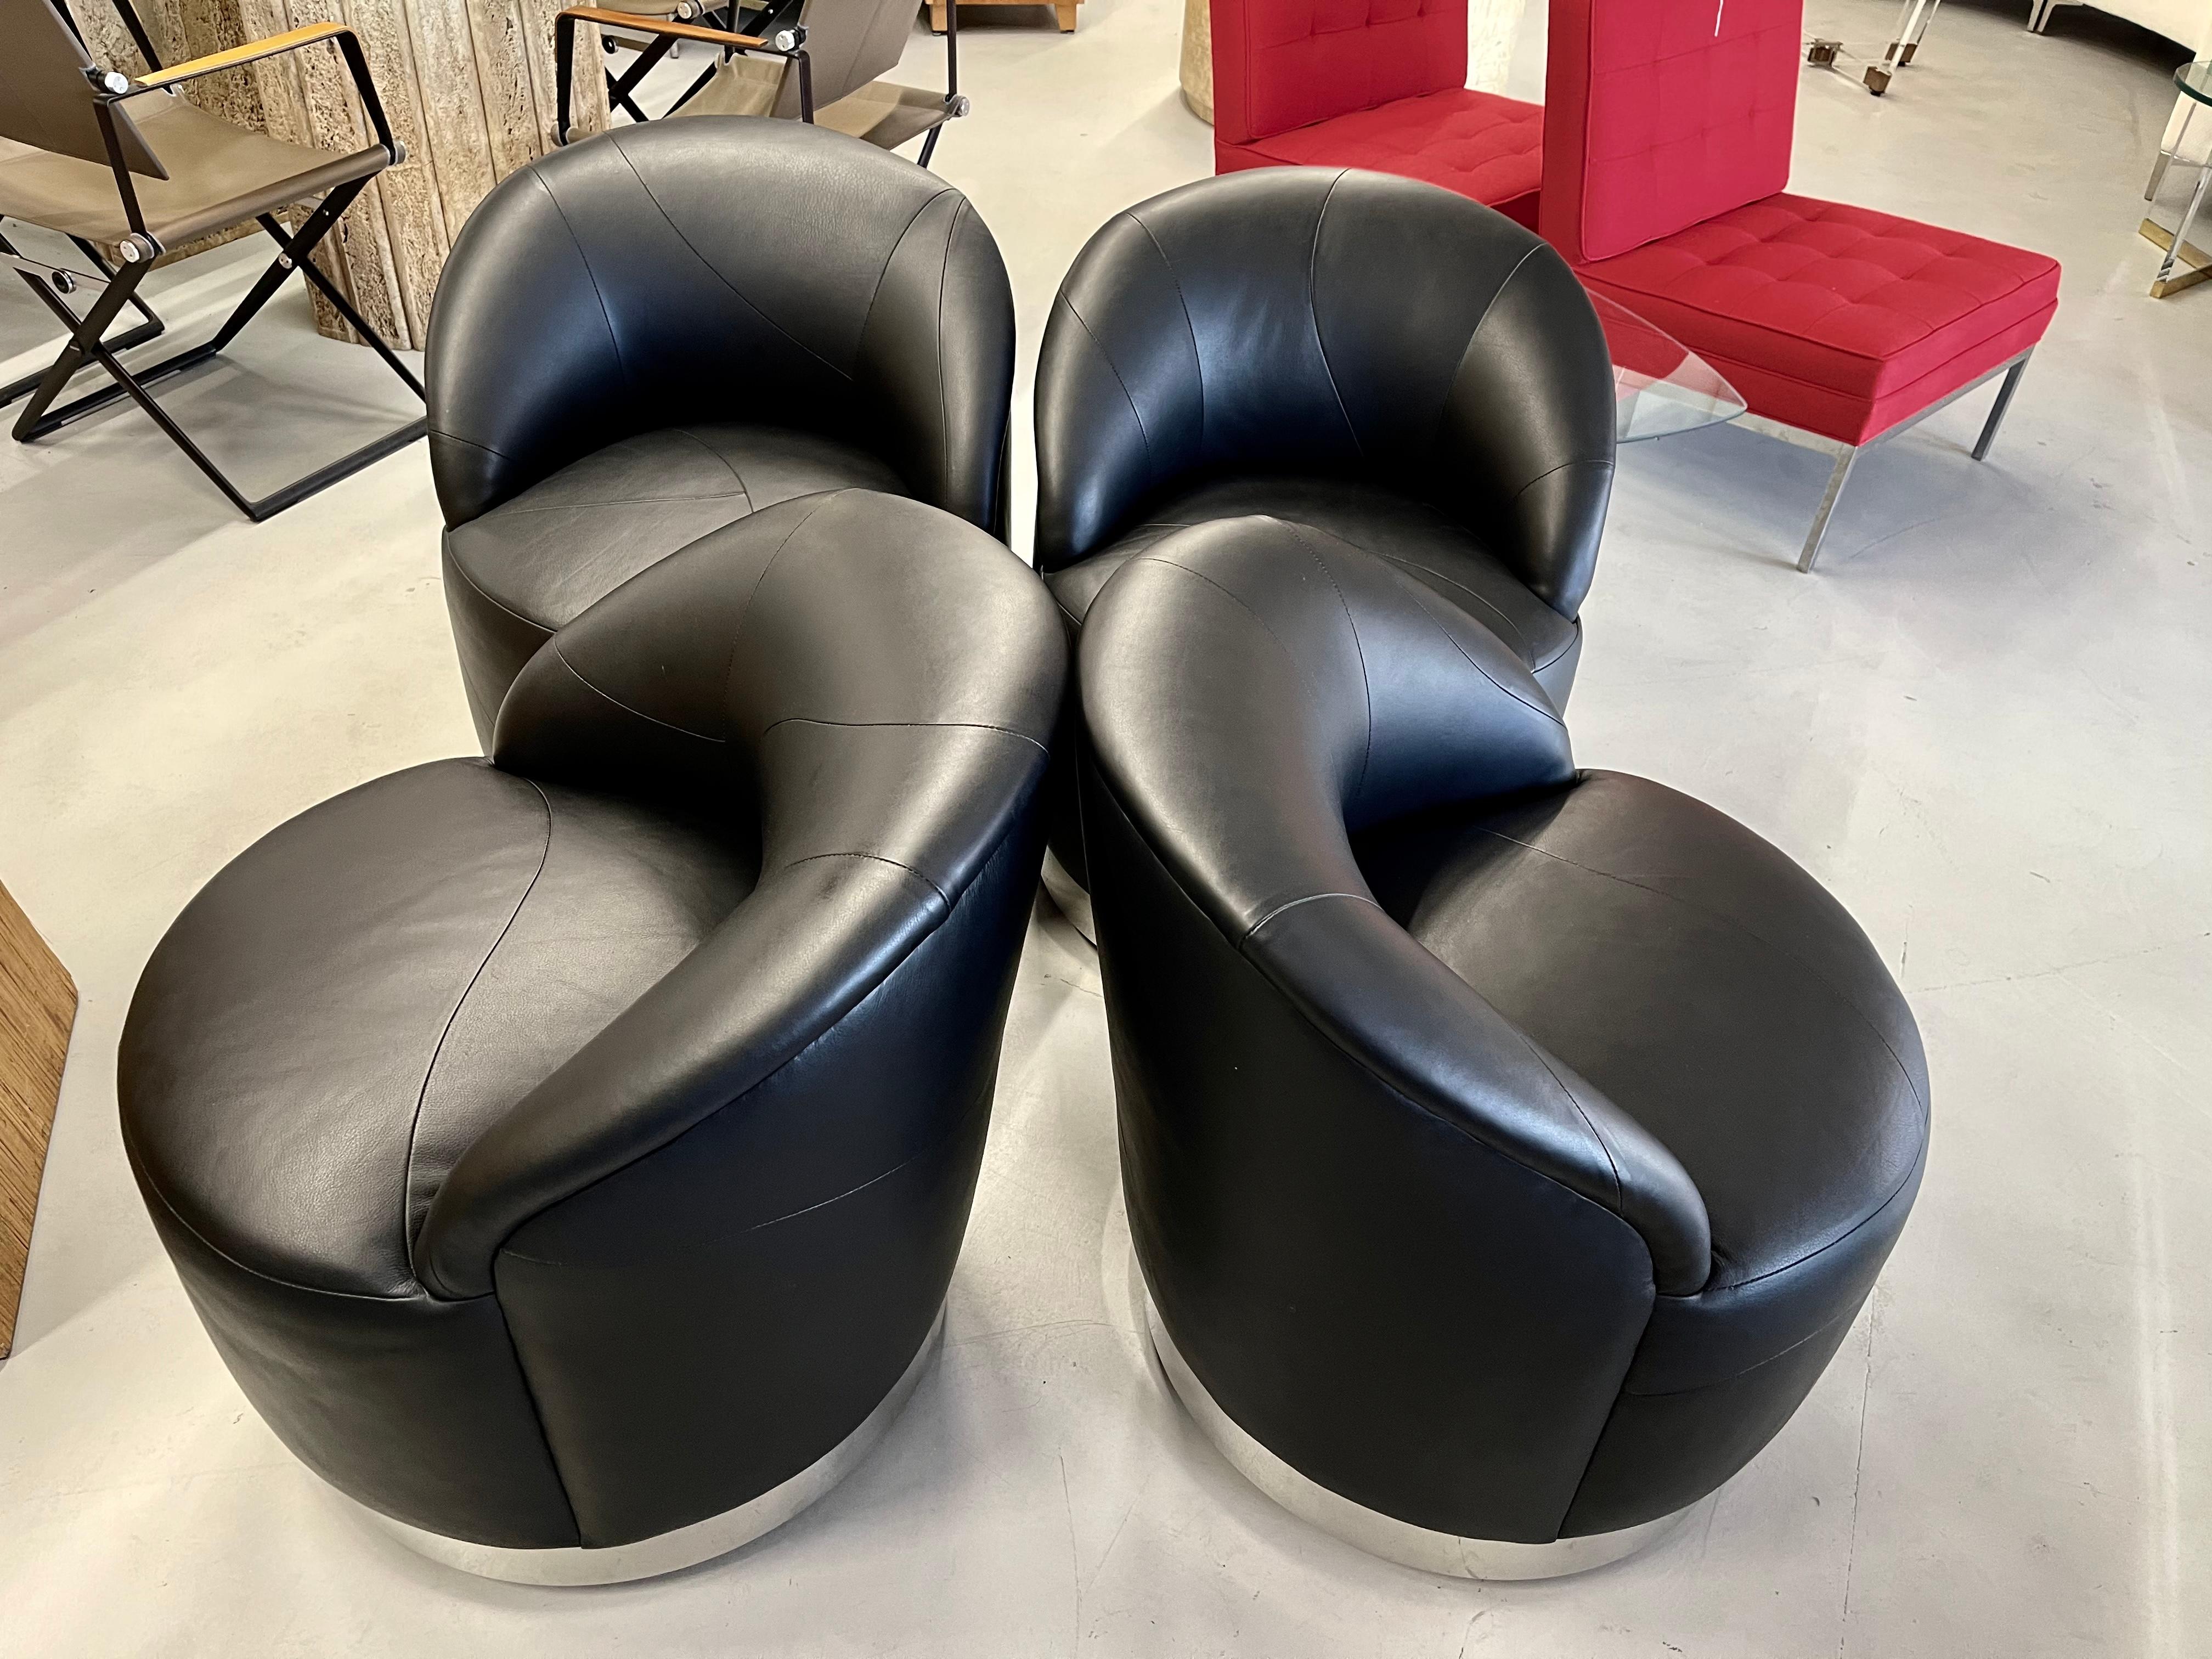 A beautiful set of 4 leather swivel chairs in Calfskin by J Robert Scott. Sally Sirkin Lewis used the softest and highest grade leather. They are wonderfully seamed together in an assymetric pattern. Each chair is slightly different in pattern. They